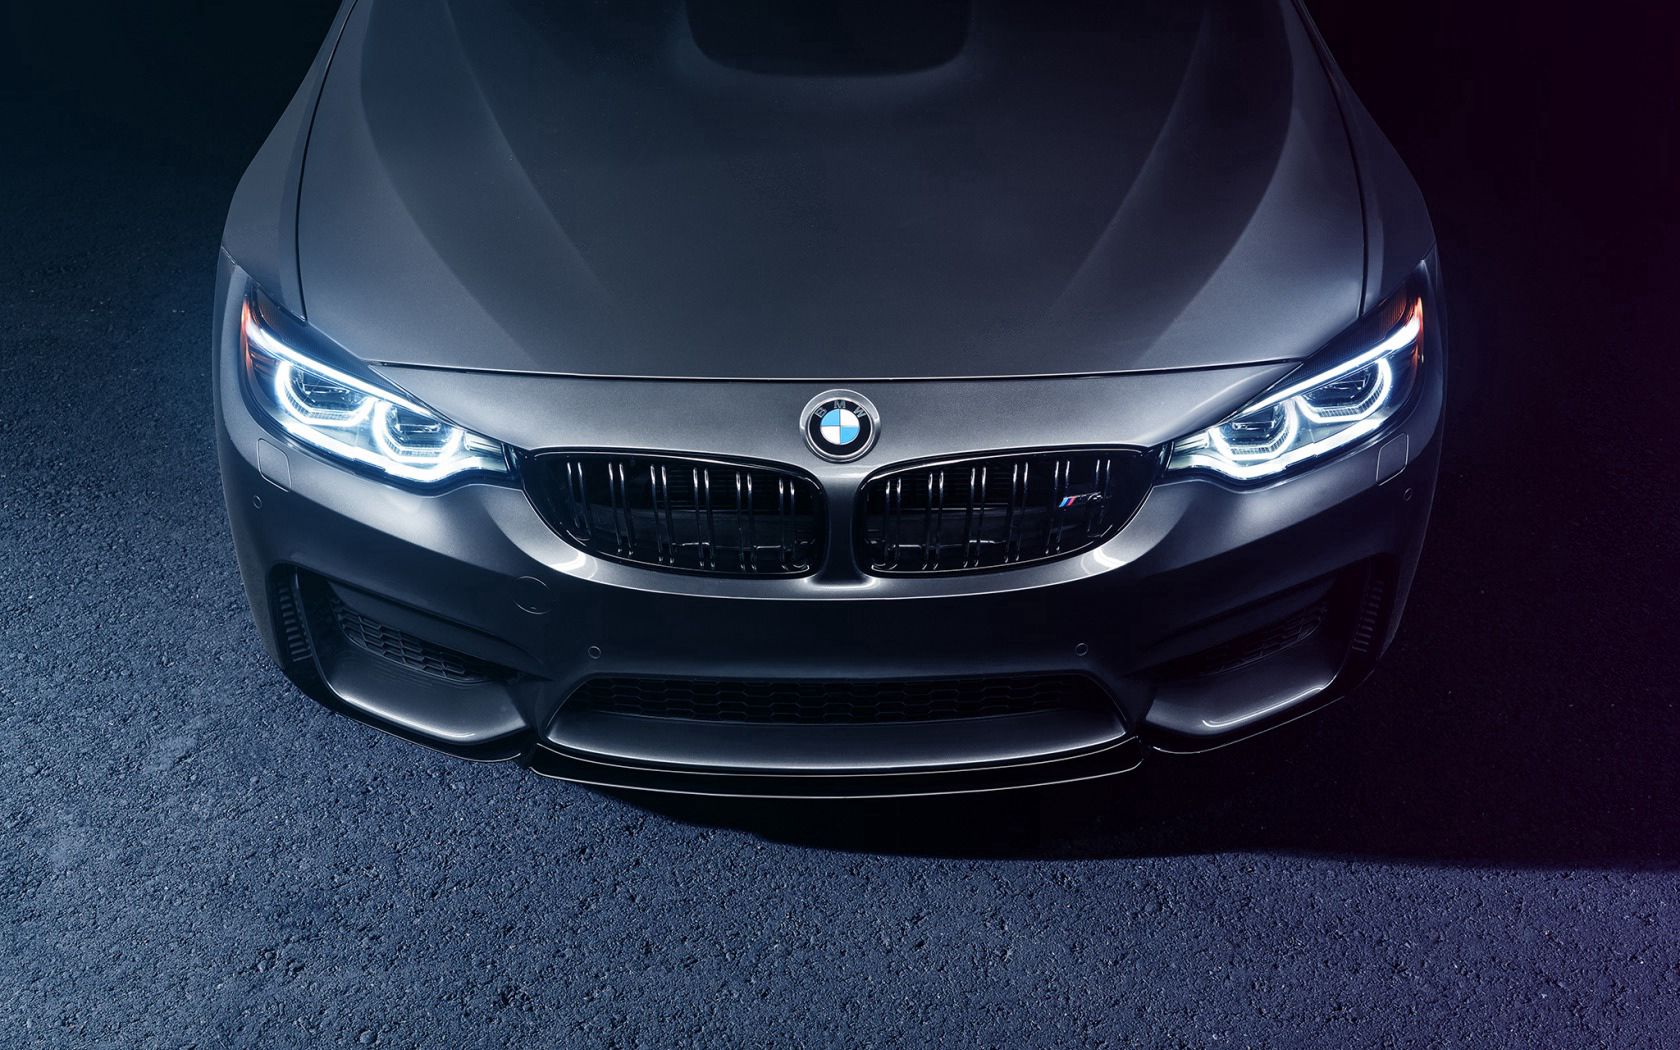 m4, hood, bmw, cars, front view